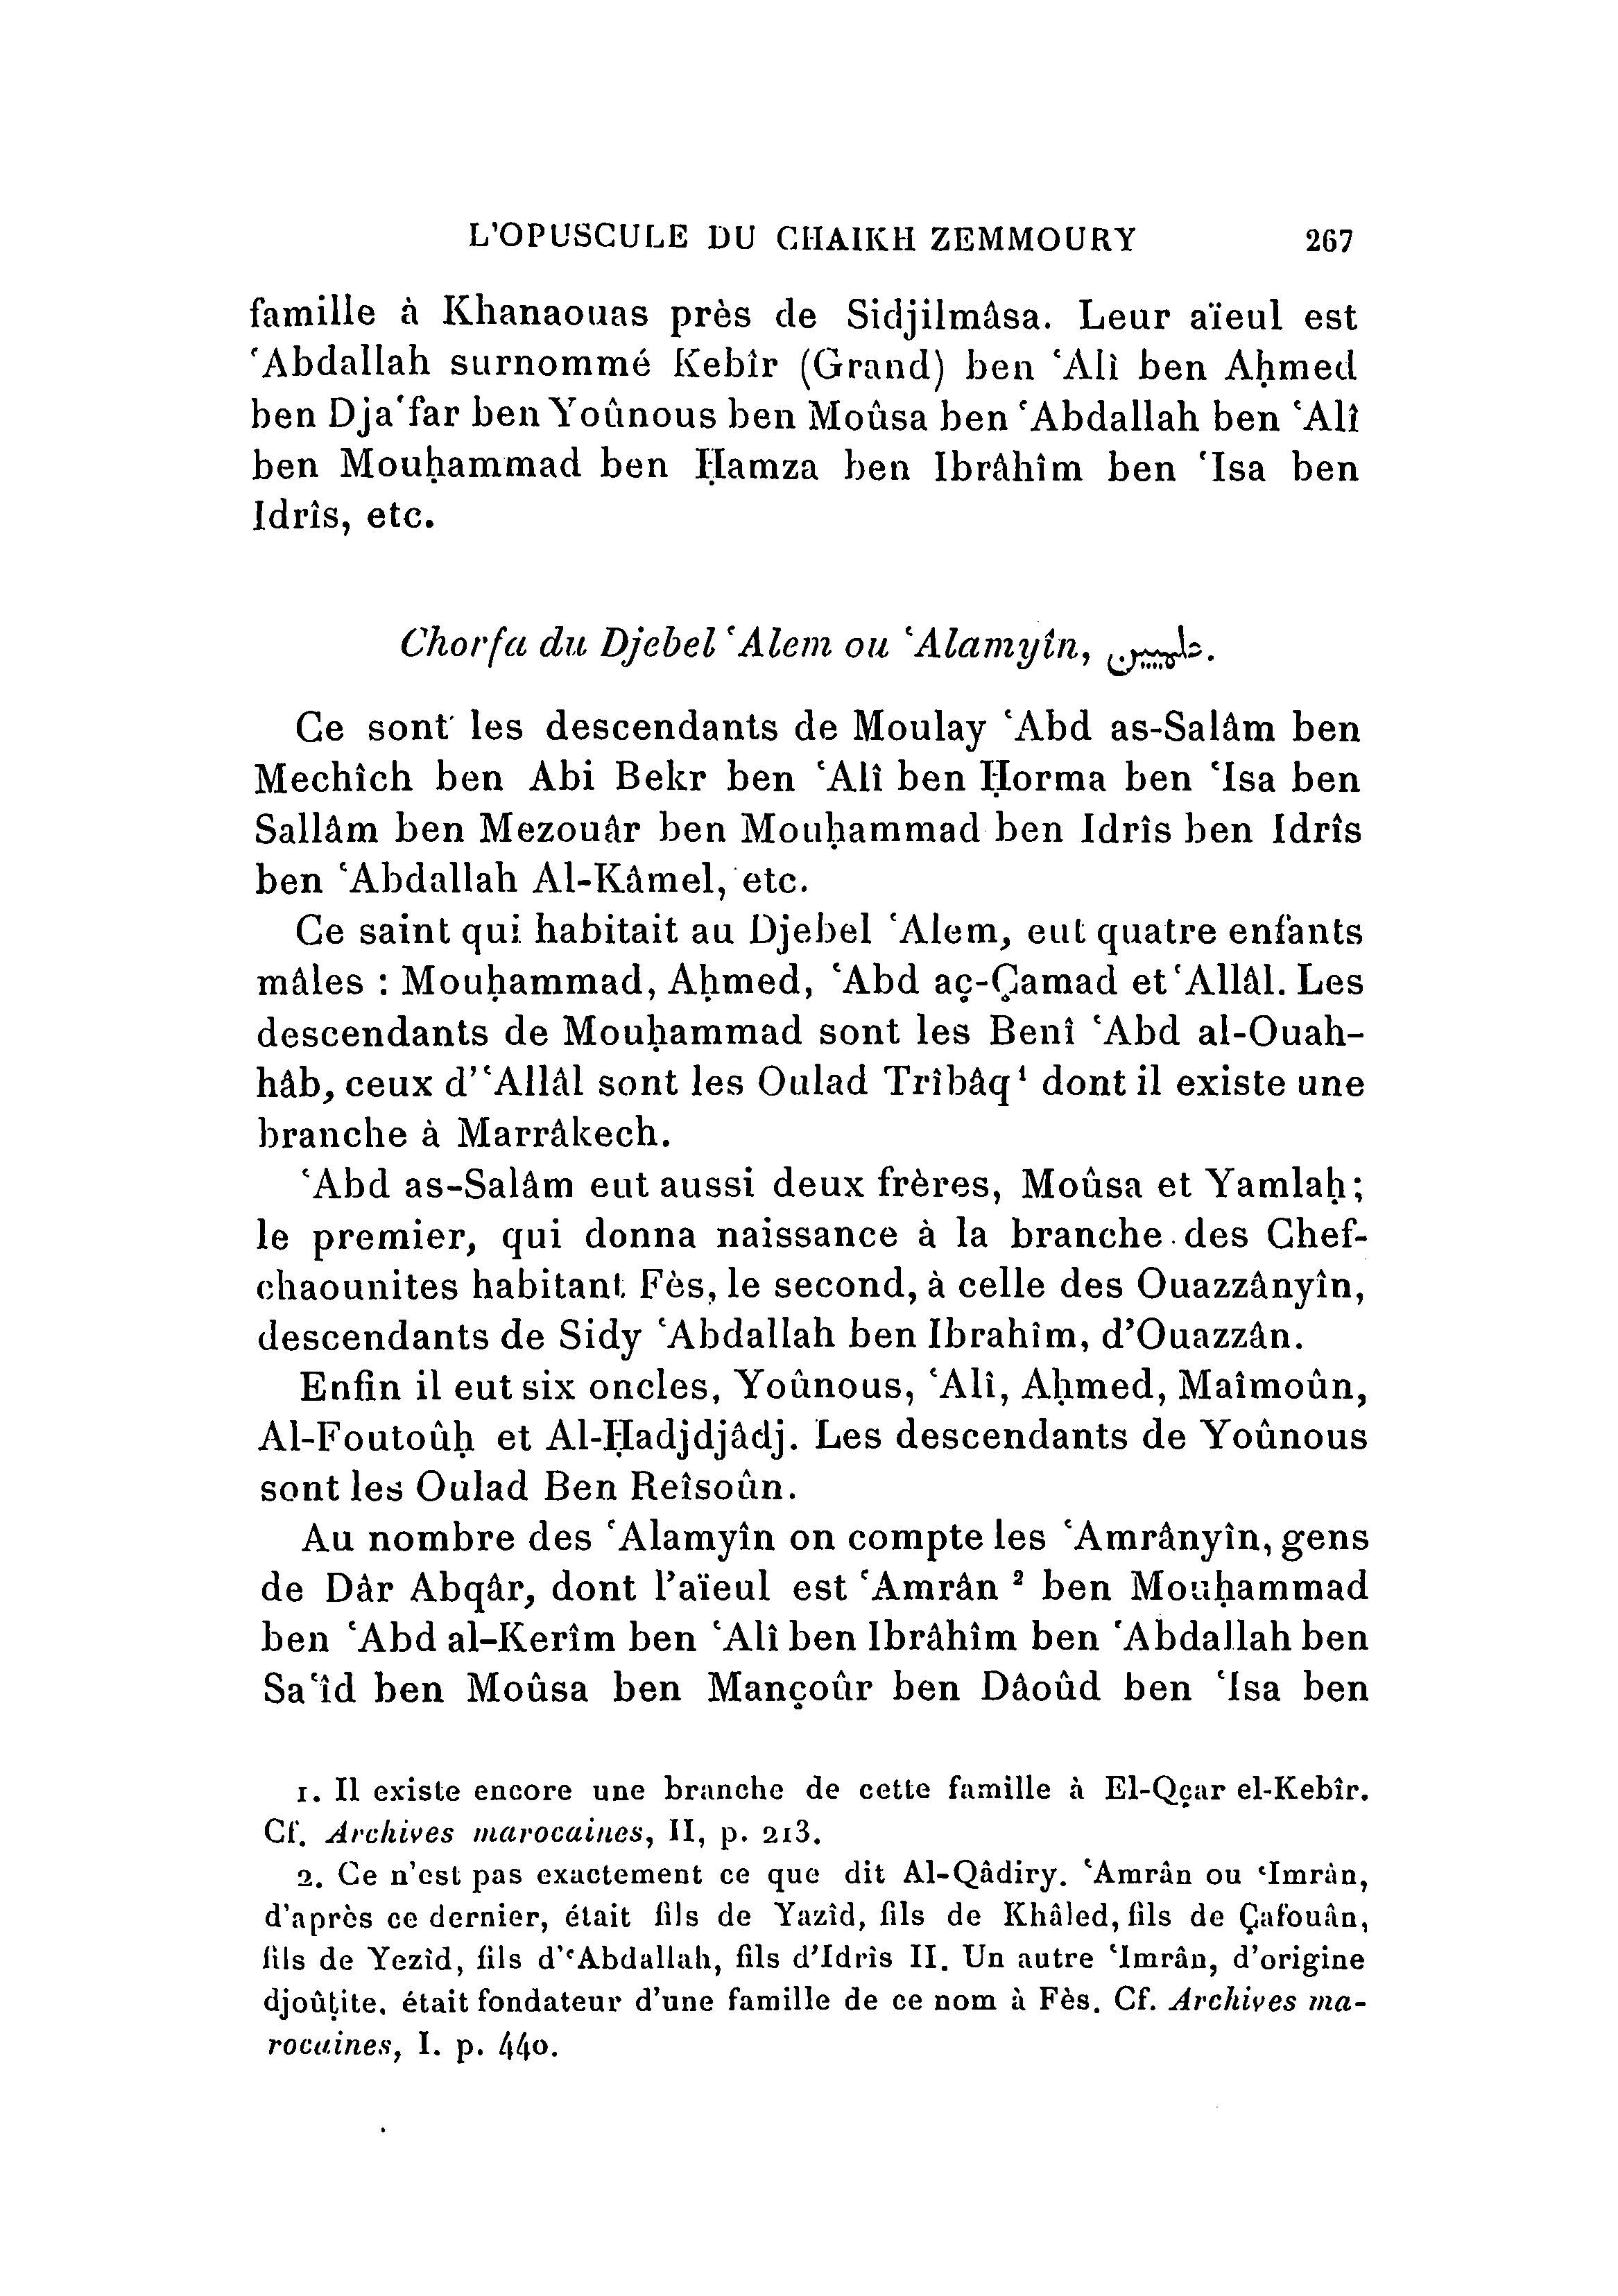 archives_marocaines-vol-2_1_page_442